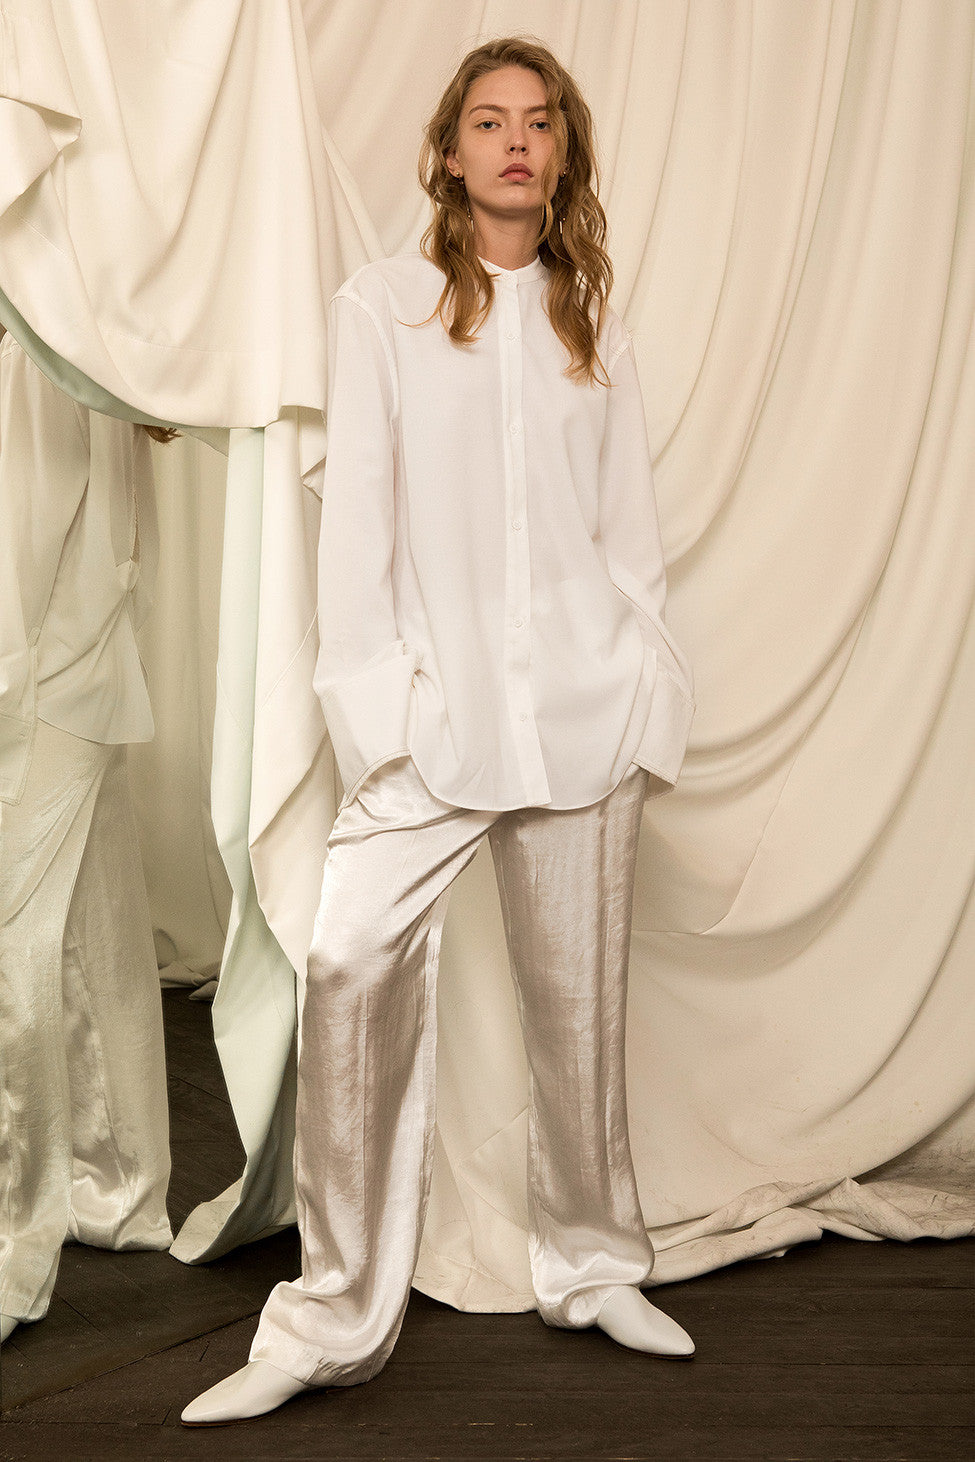 The Yuku Top in Off White, featuring deep V-slits with back knot, tassel detailing at cuffs and slits, concealed button down placket. Dropped shoulder. 